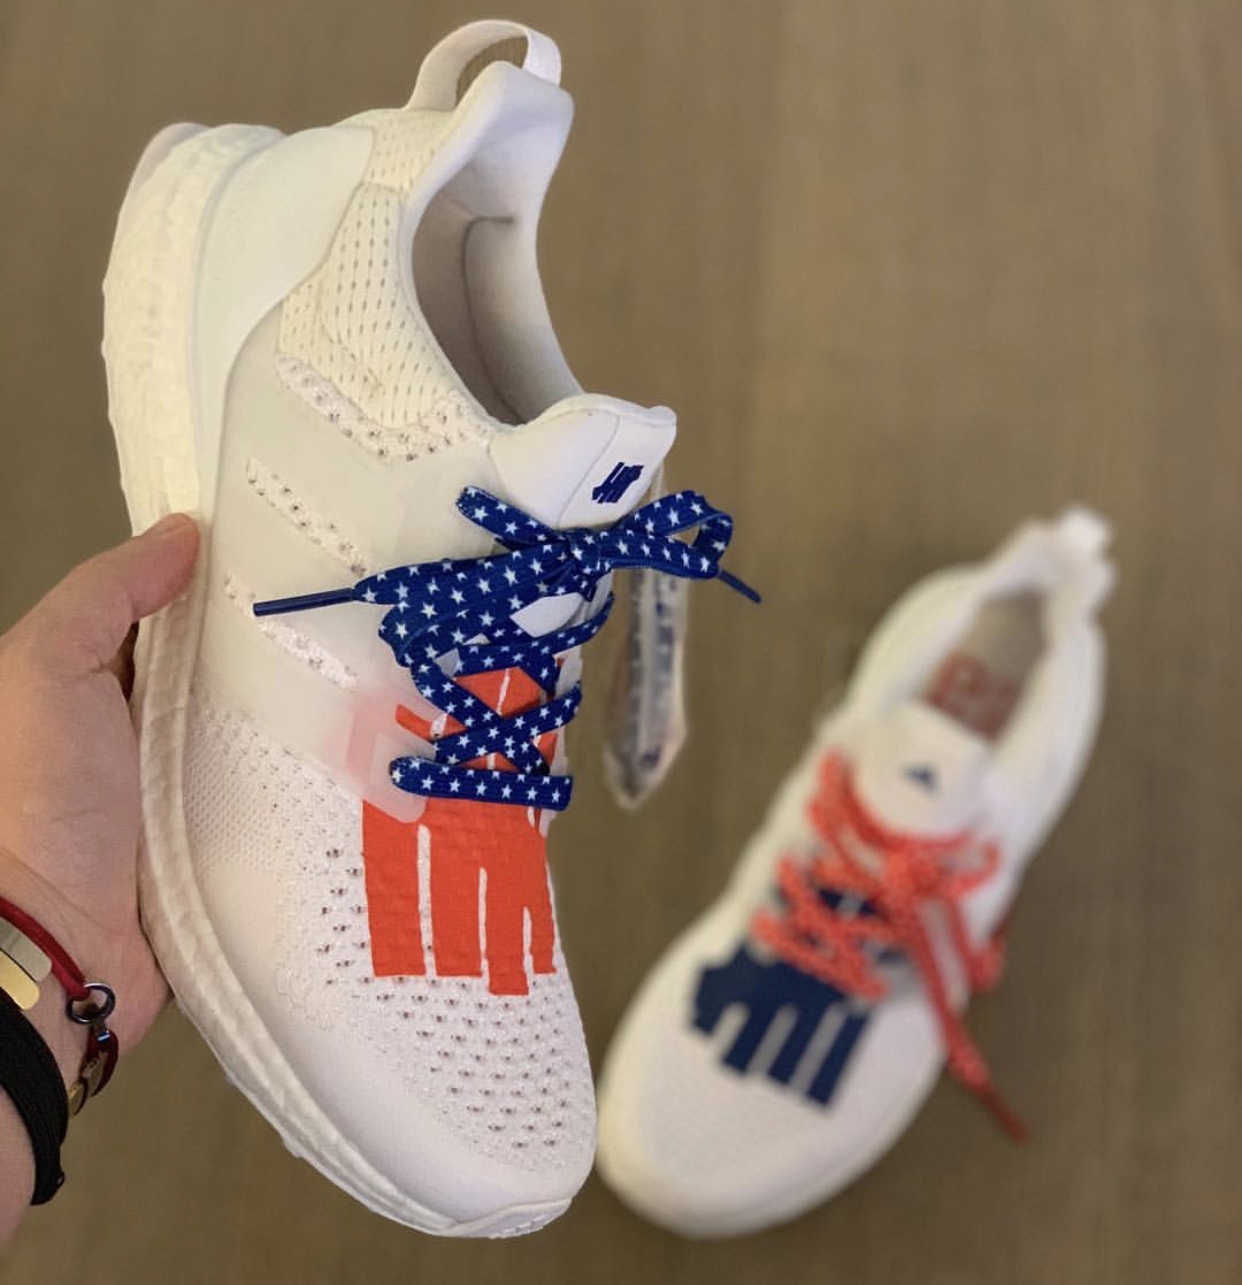 adidas undefeated stars and stripes